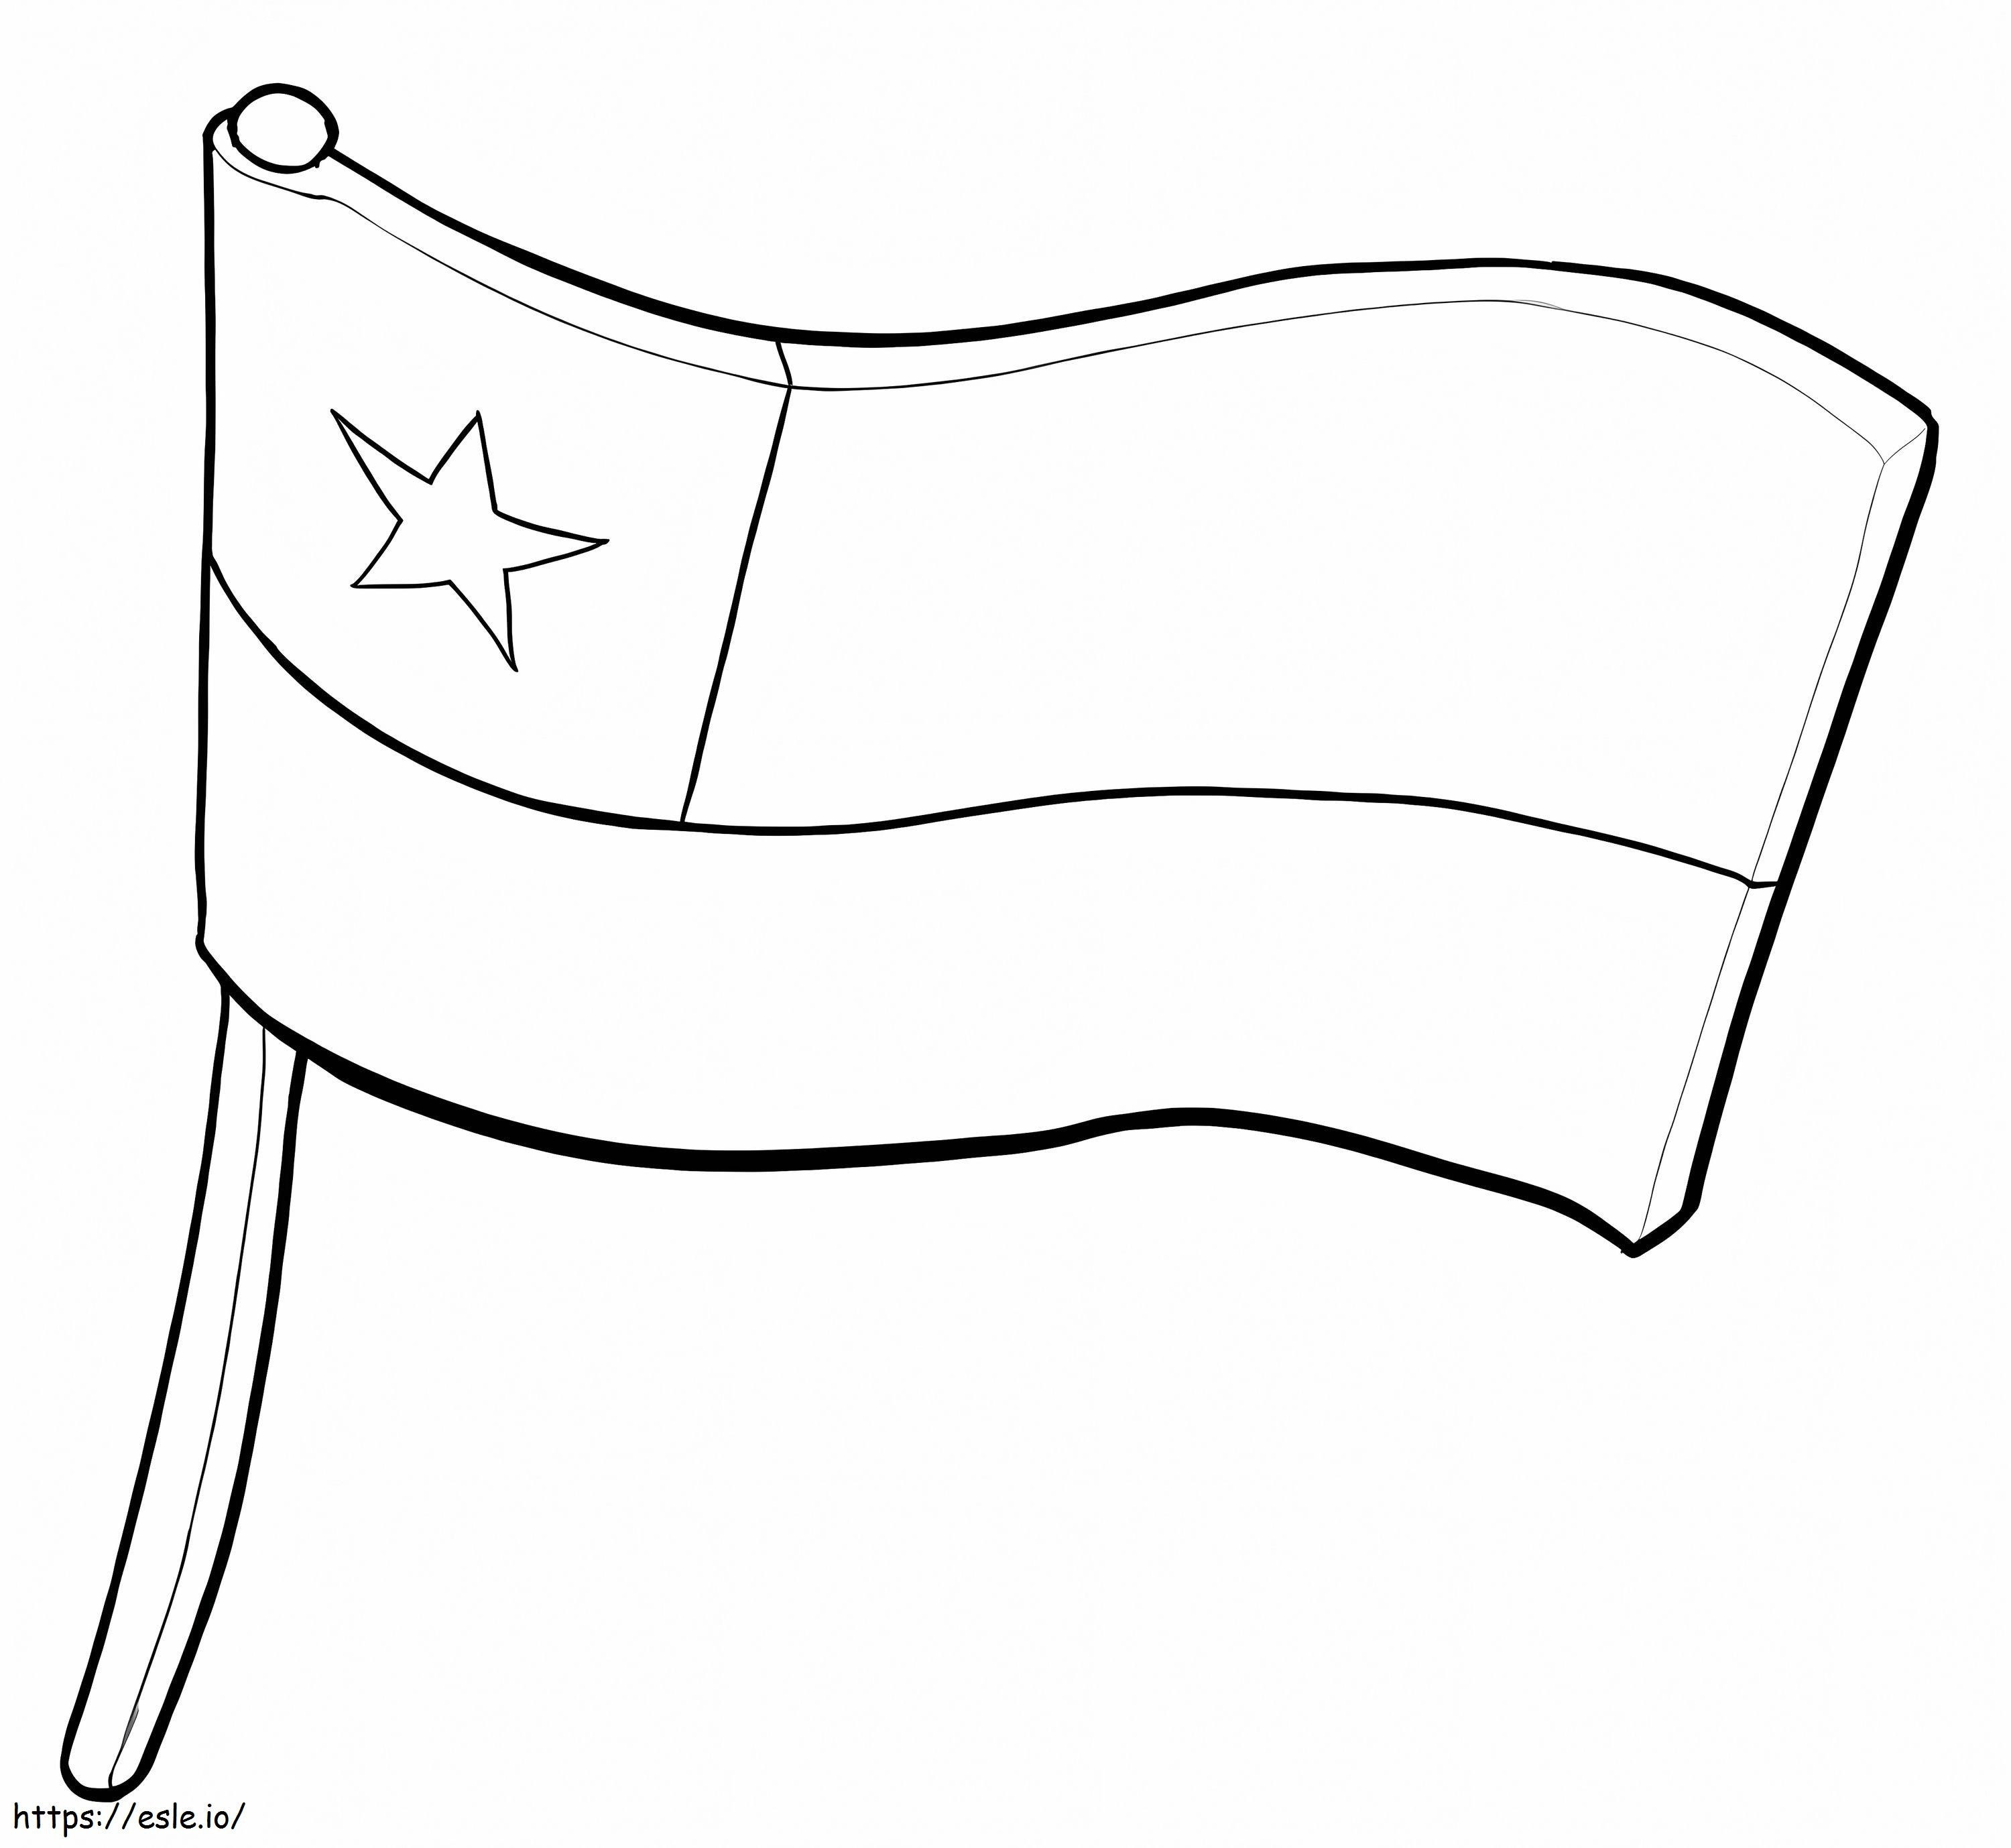 Chiles Flag coloring page